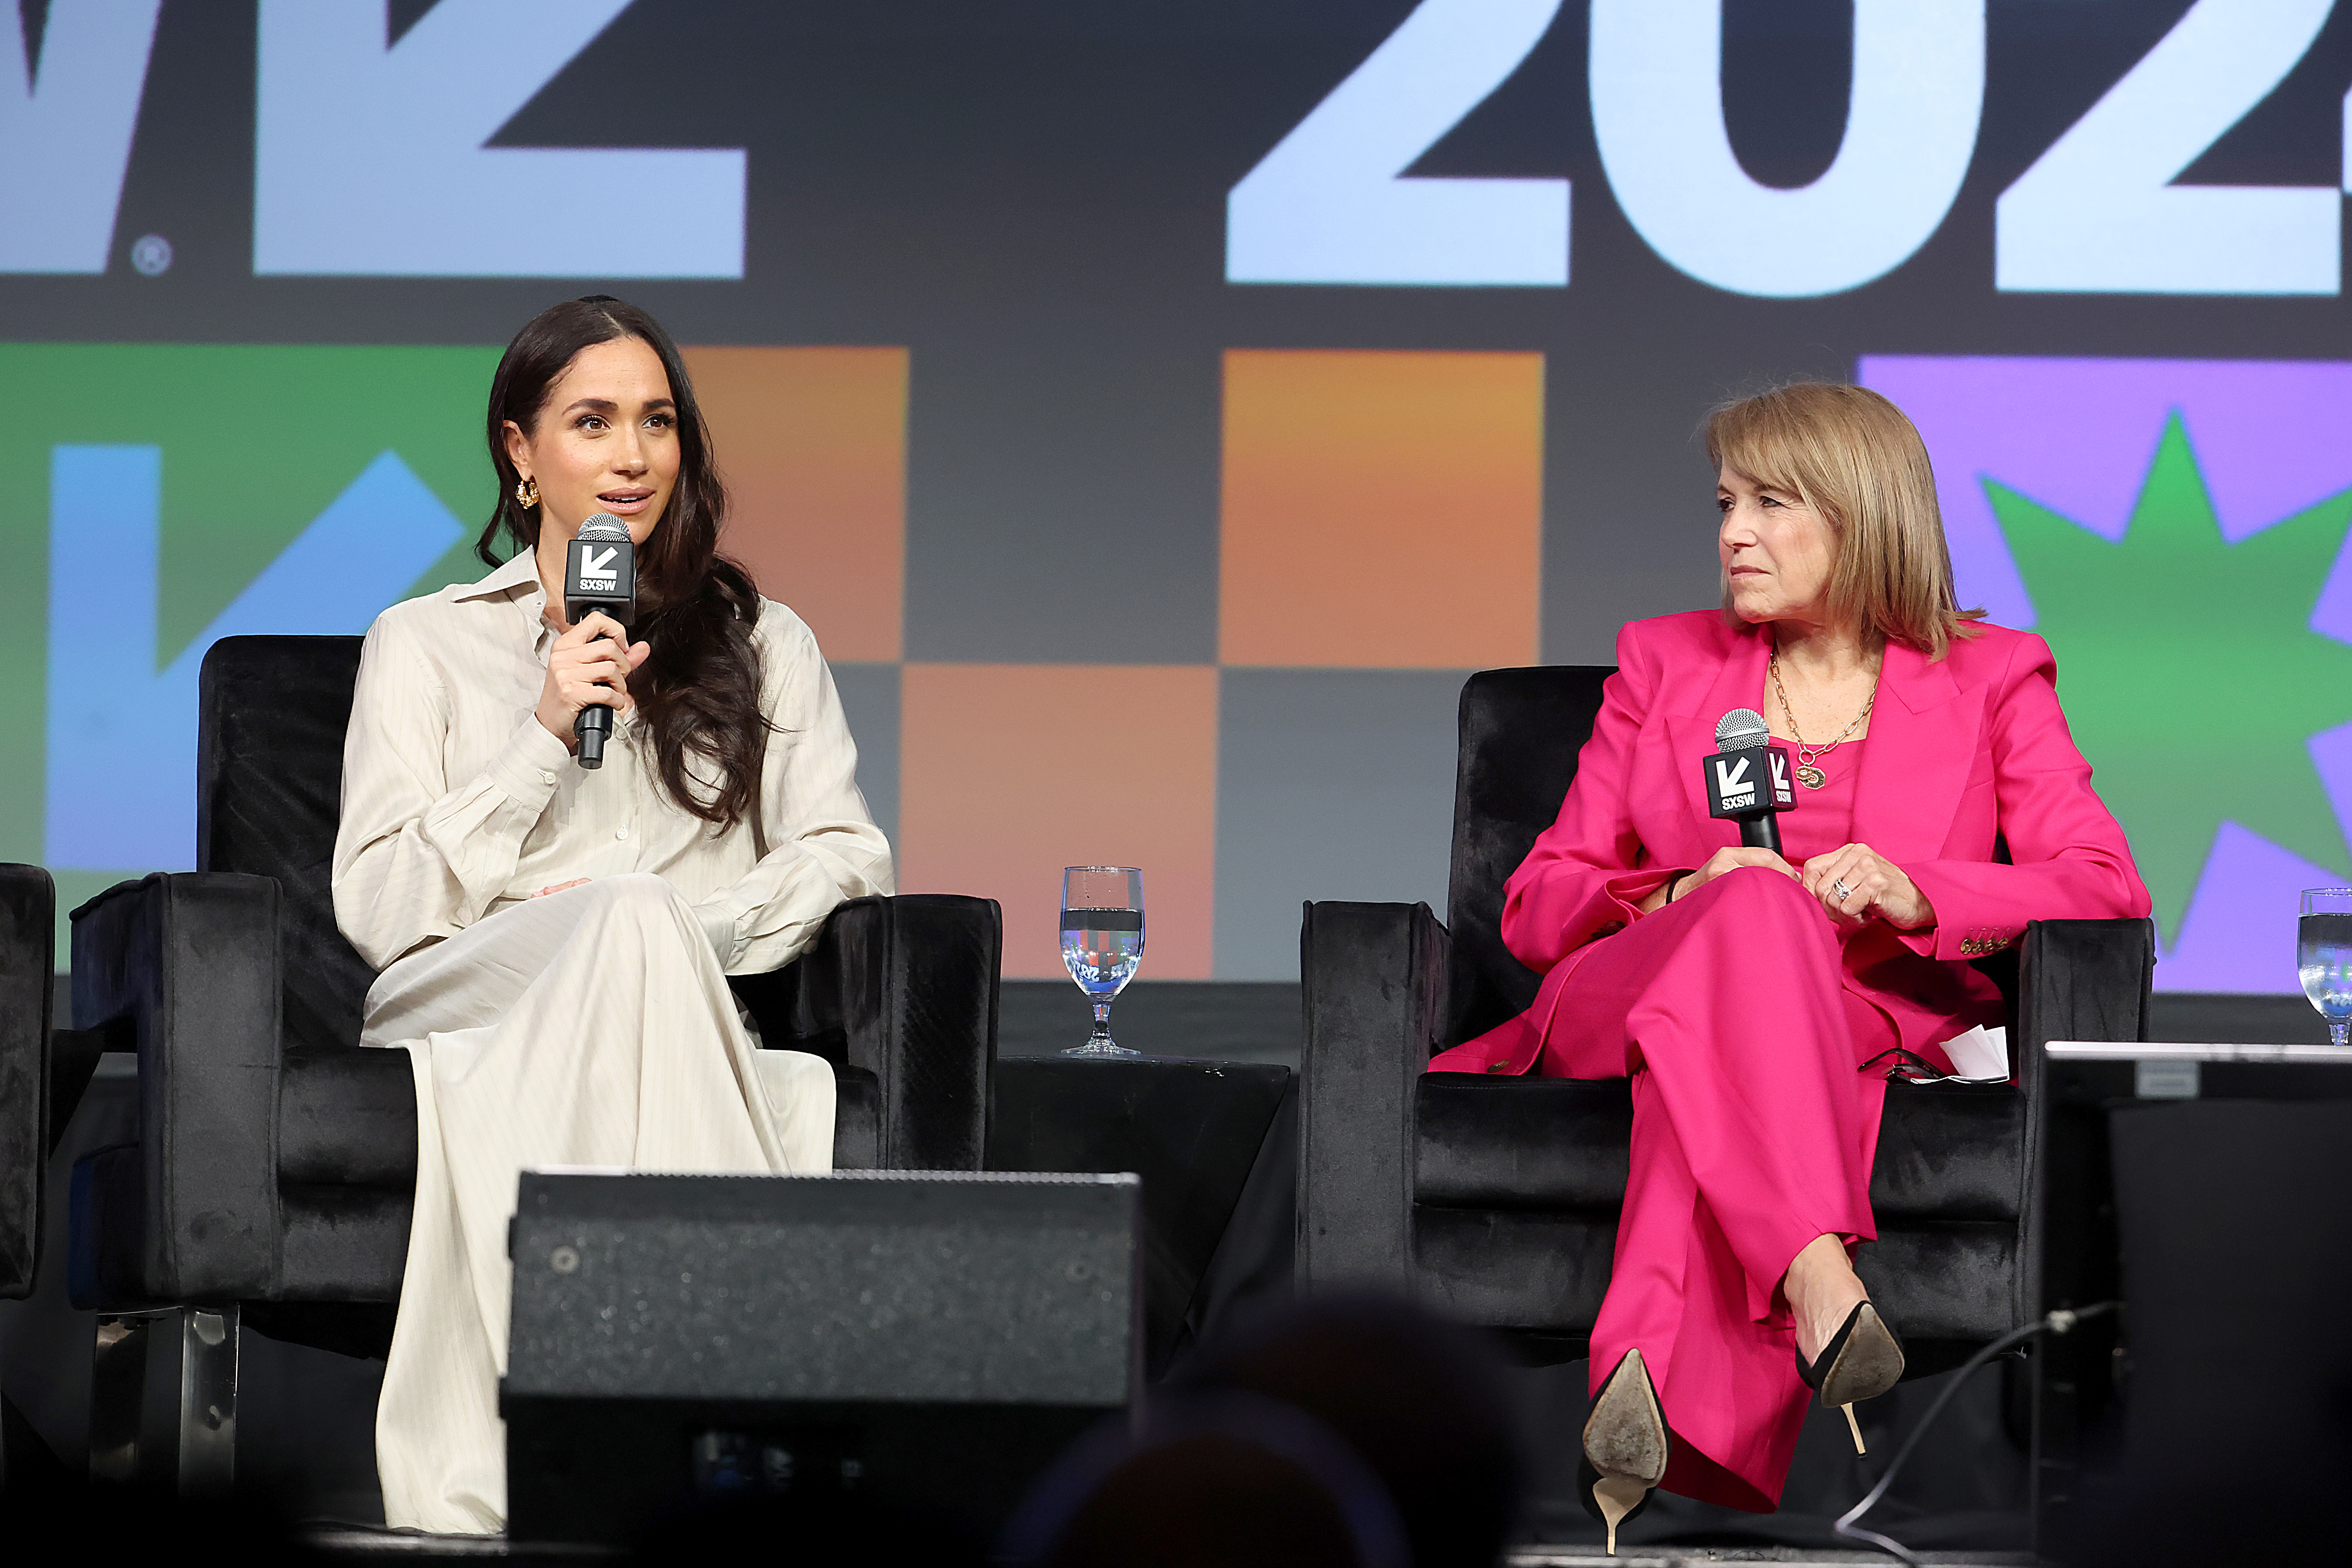 Meghan Markle und Katie Couric bei der Veranstaltung "Breaking Barriers, Shaping Narratives: How Women Lead On and Off the Screen" während der 2024 SXSW Conference and Festival im Austin Convention Center am 8. März 2024 in Austin, Texas. | Quelle: Getty Images